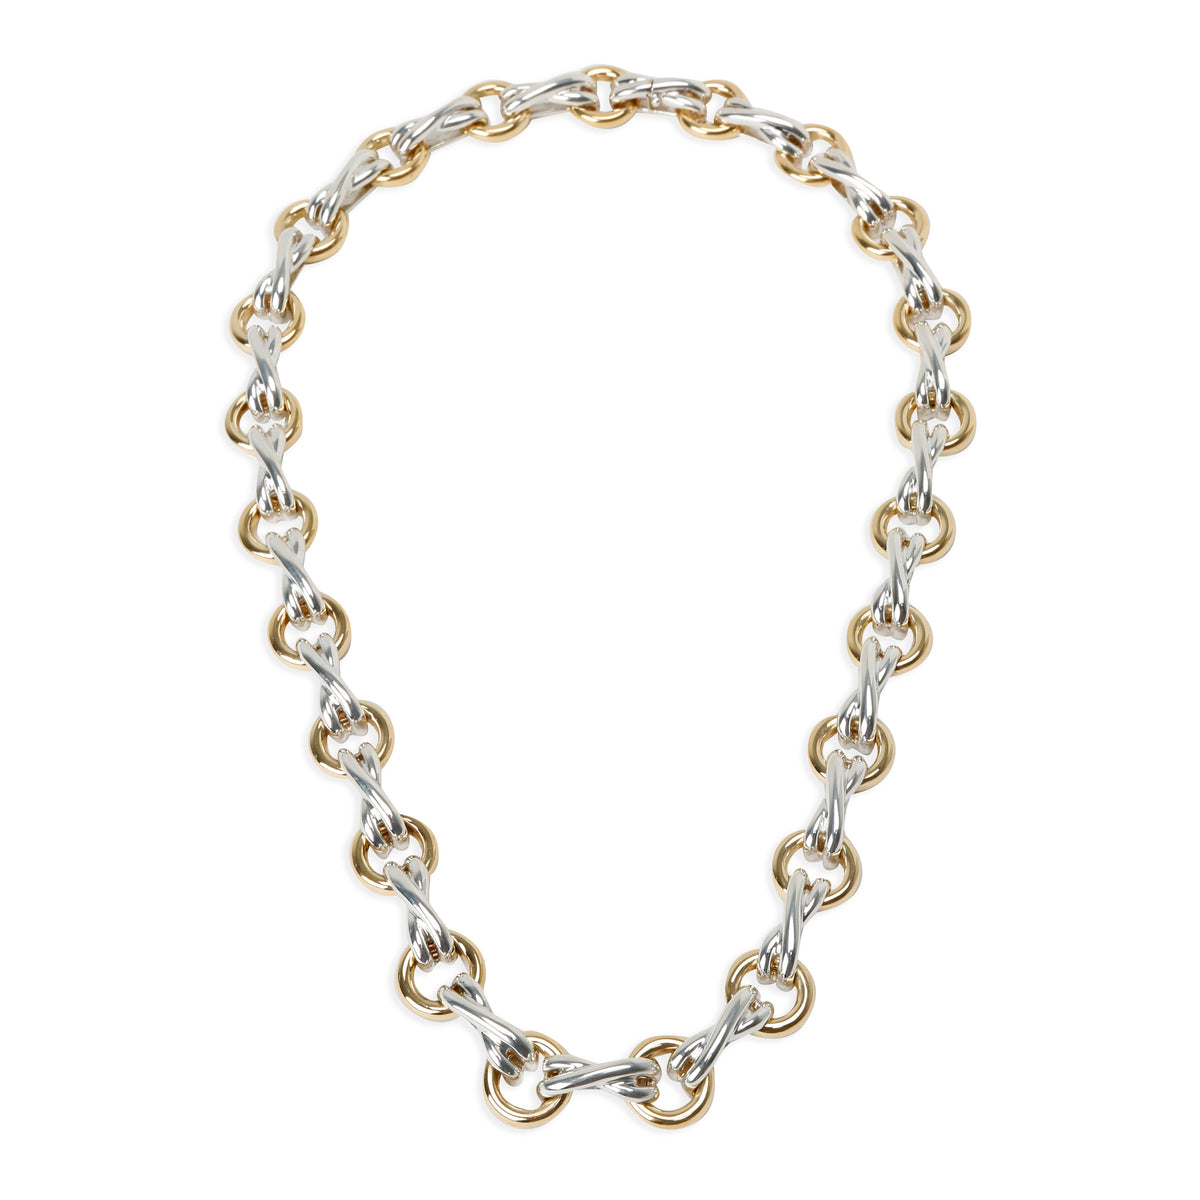 Tiffany & Co. Paloma Picasso X&O Necklace in 18K Yellow Gold/Sterling Silver